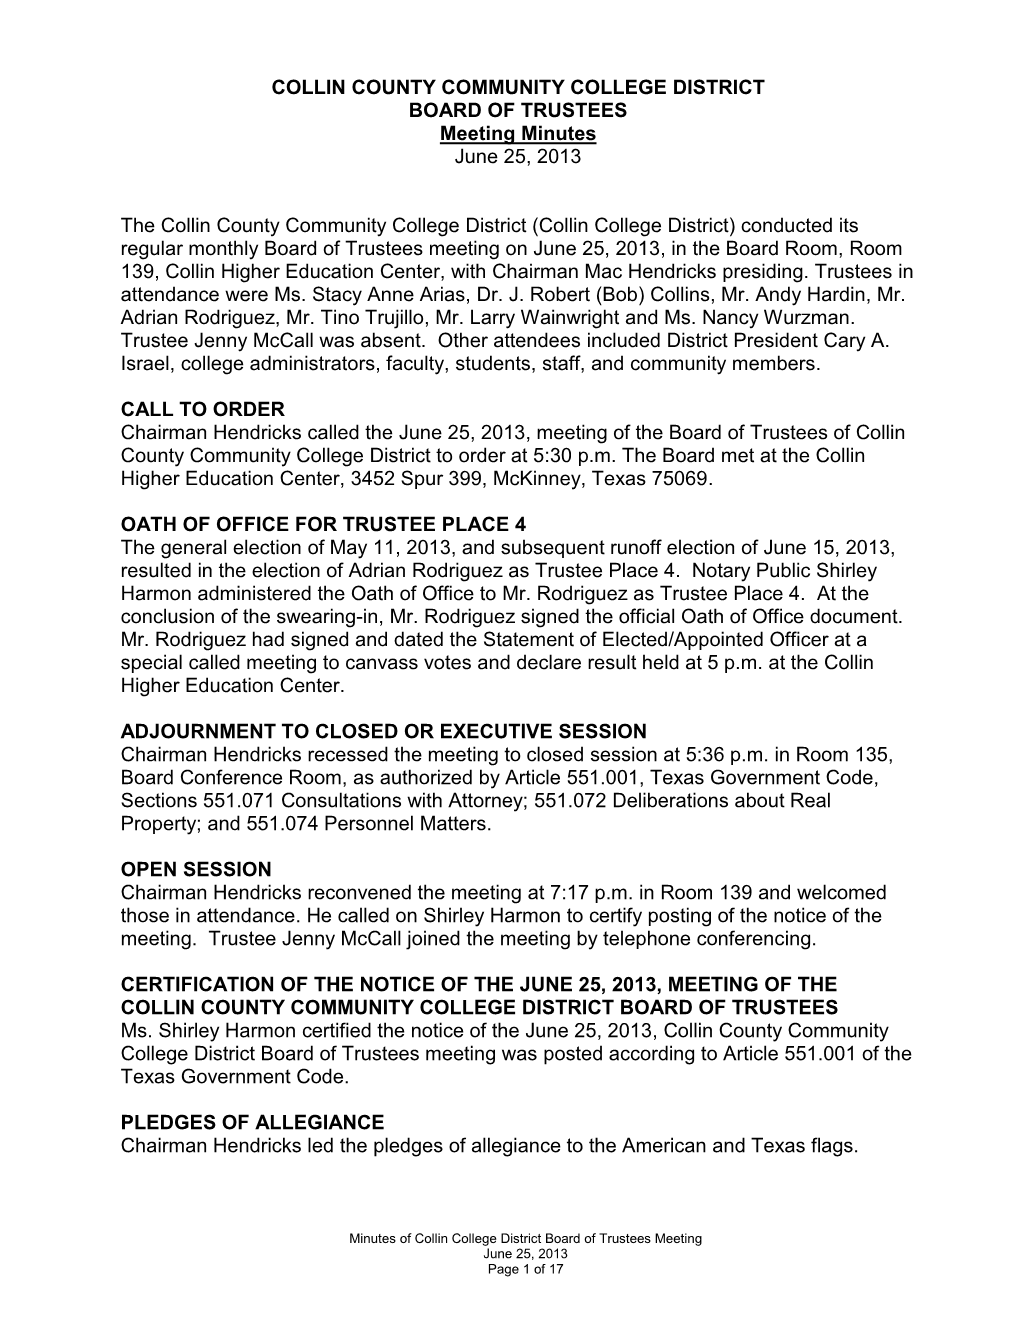 COLLIN COUNTY COMMUNITY COLLEGE DISTRICT BOARD of TRUSTEES Meeting Minutes June 25, 2013